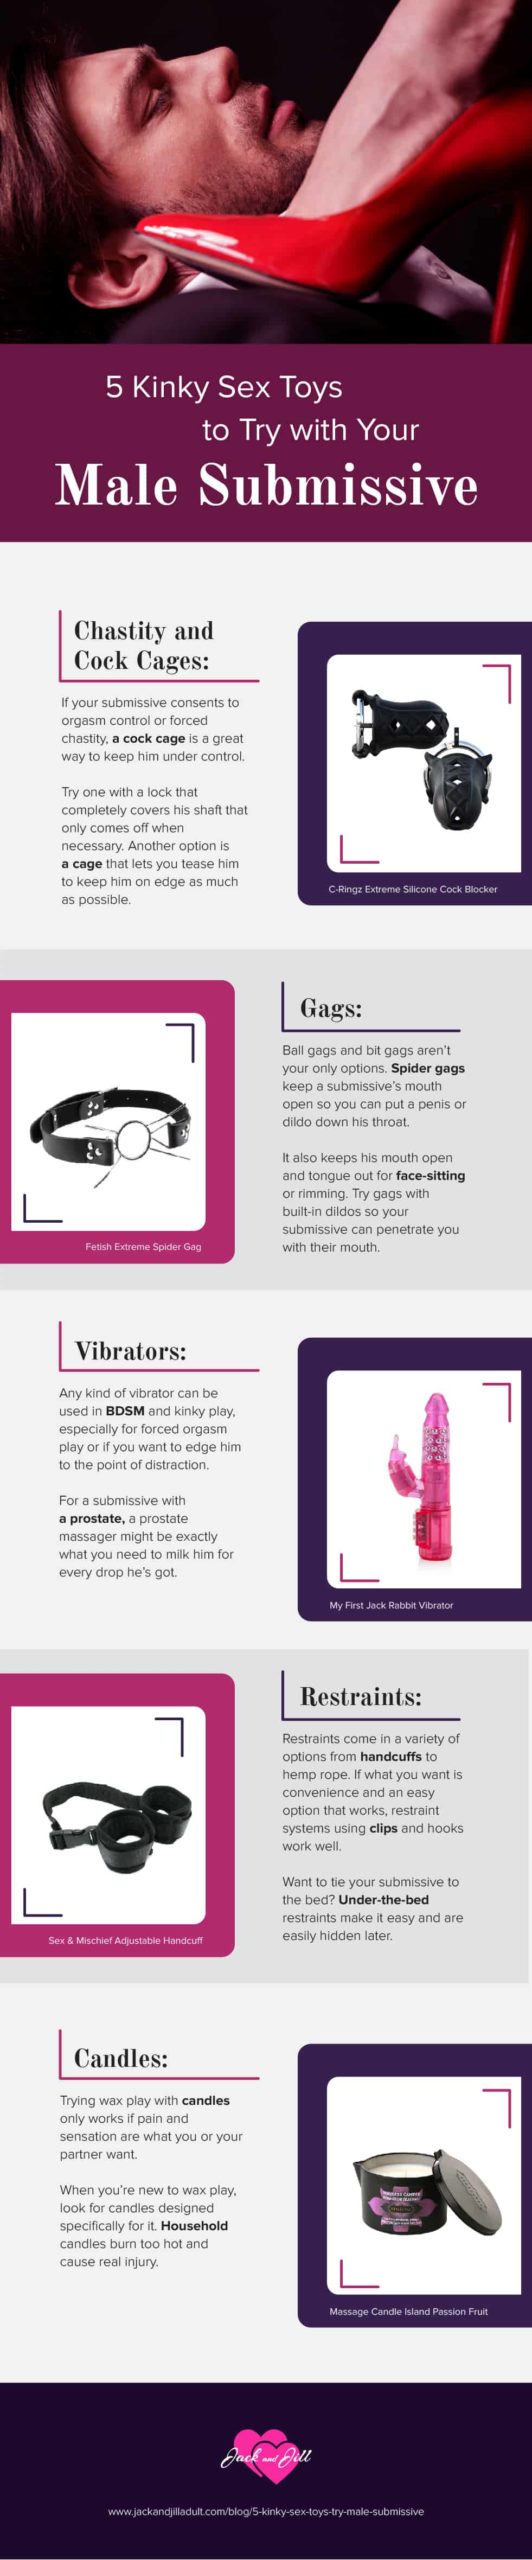 Infographic for 5 Kinky Sex Toys to Try with Your Male Submissive